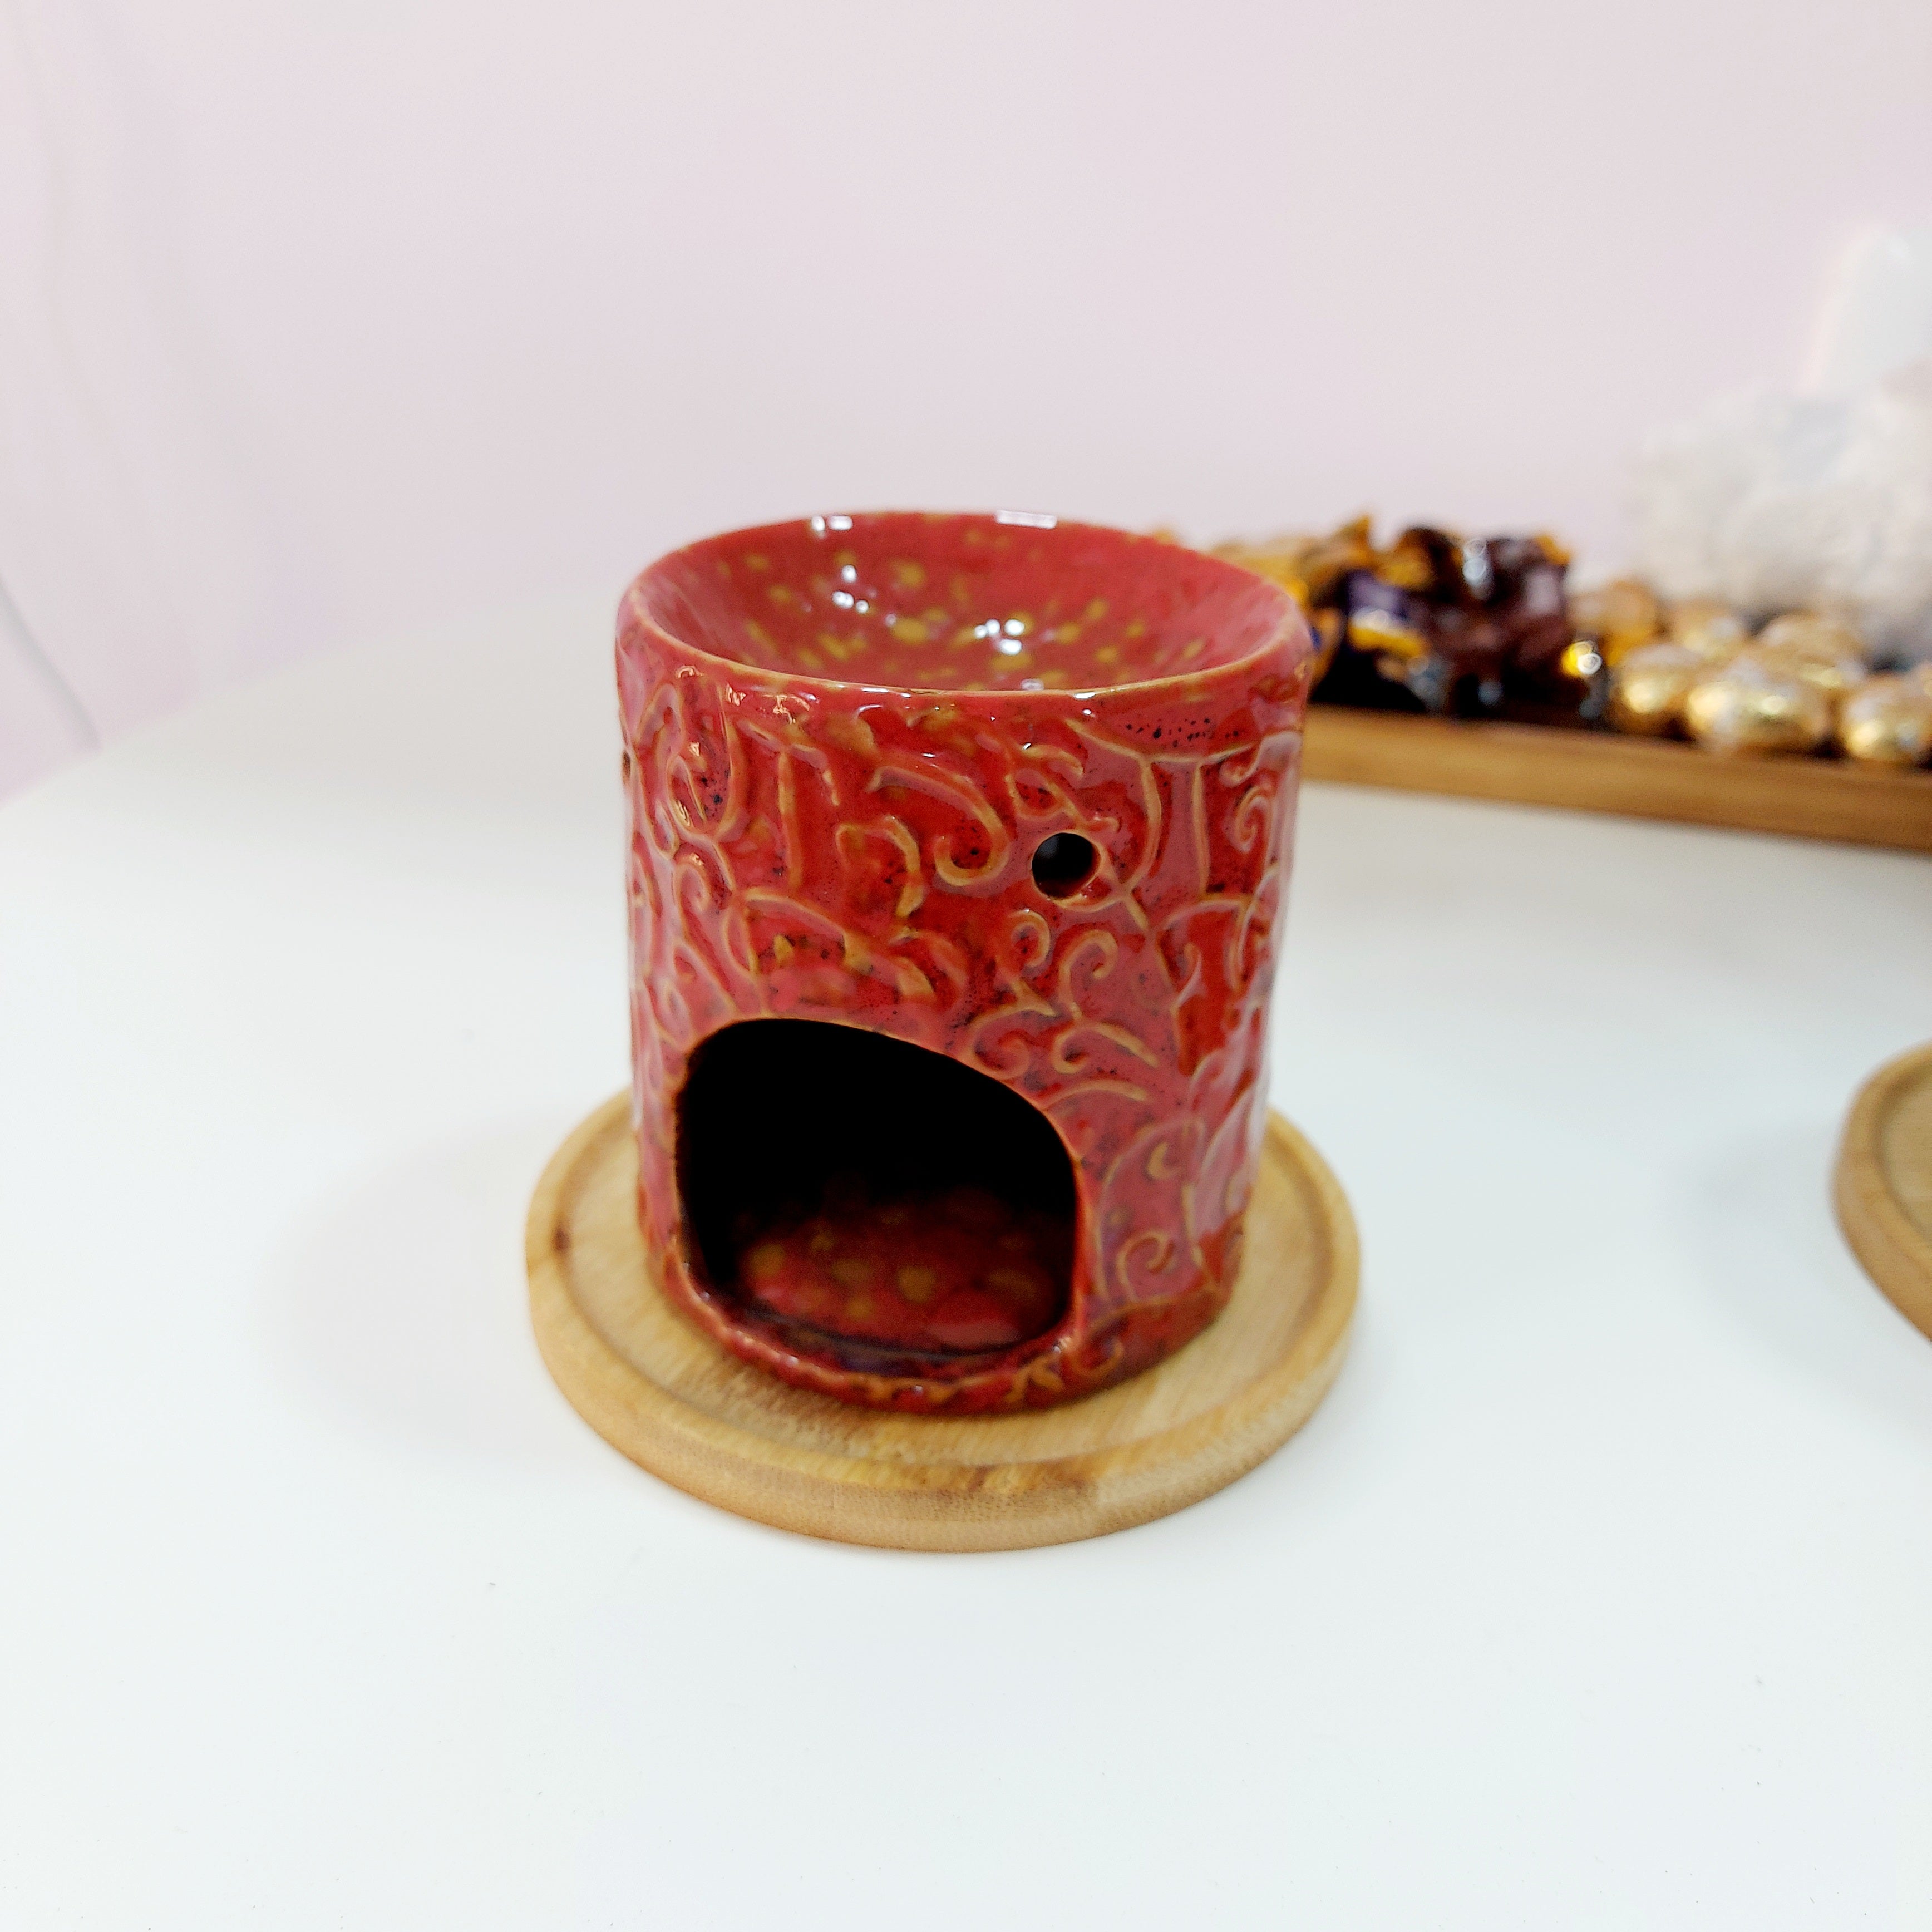 Melts my Heart gift set. Essential oil burner, 9 pieces of natural soy wax and bee wax melts, 3 different scents, 3 tealight candles. Monarchess Natural Luxuries skin care products. Monarchess, Amman, Irbid, Jordan